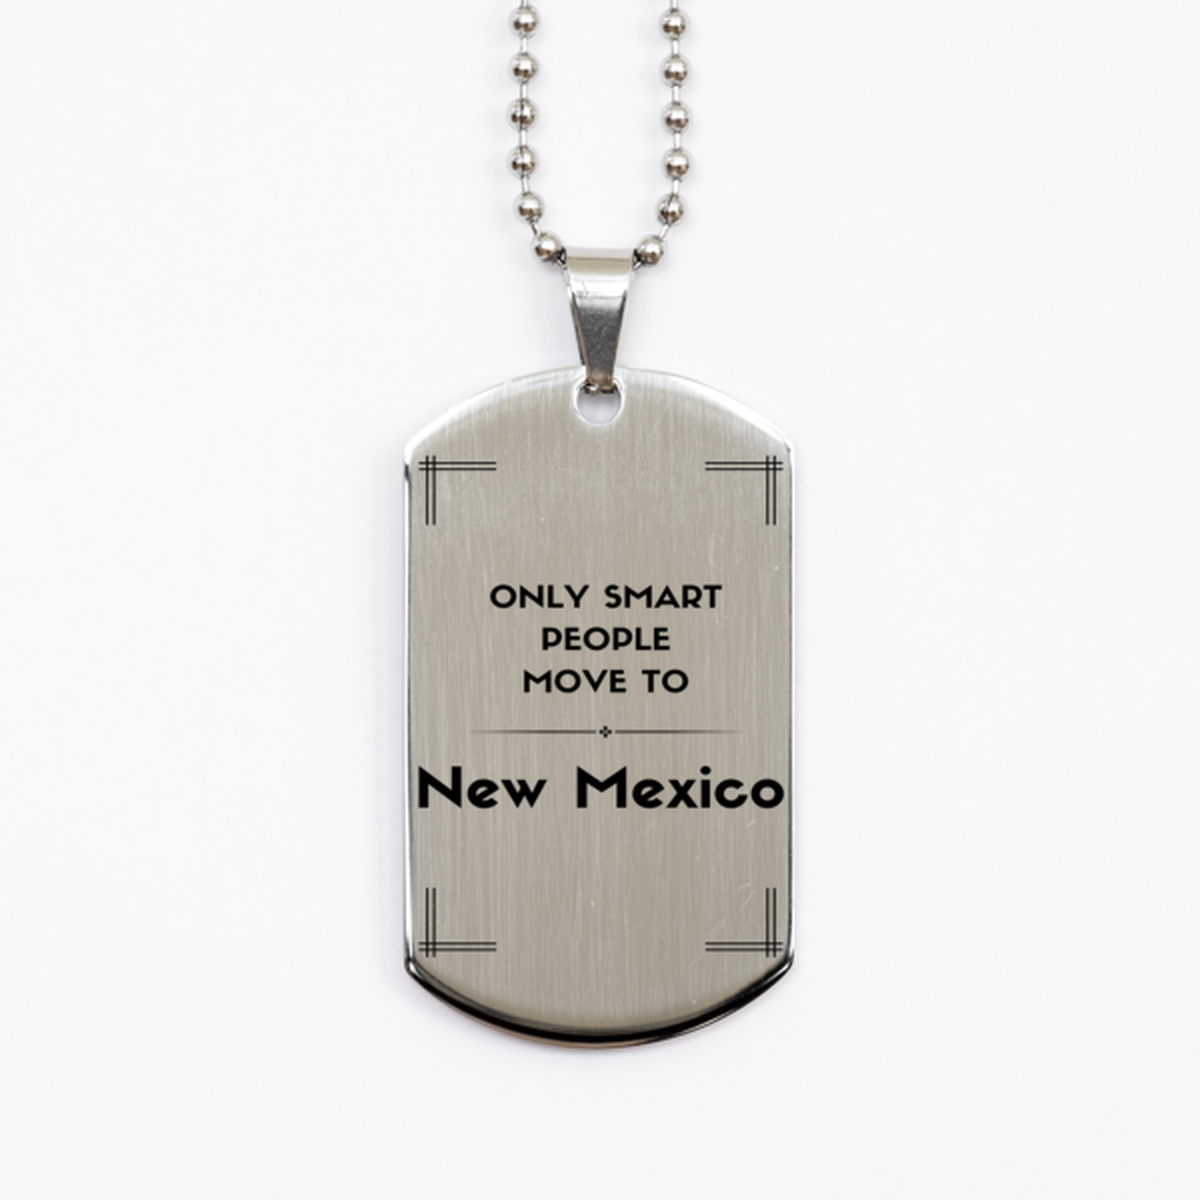 Only smart people move to New Mexico Silver Dog Tag, Gag Gifts For New Mexico, Move to New Mexico Gifts for Friends Coworker Funny Saying Quote